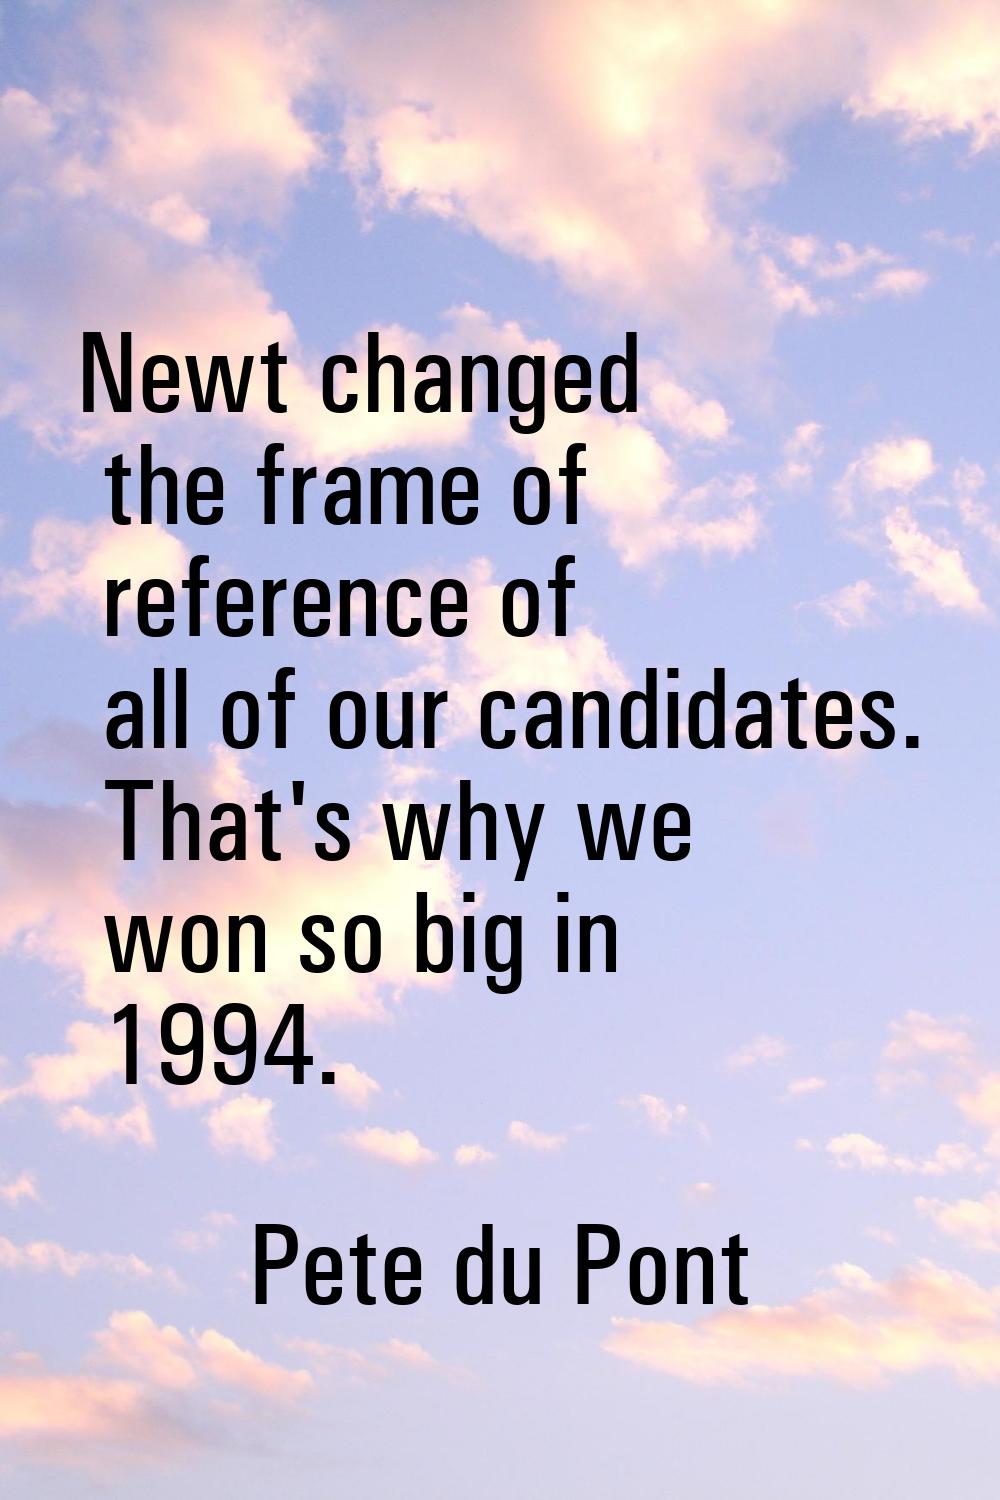 Newt changed the frame of reference of all of our candidates. That's why we won so big in 1994.